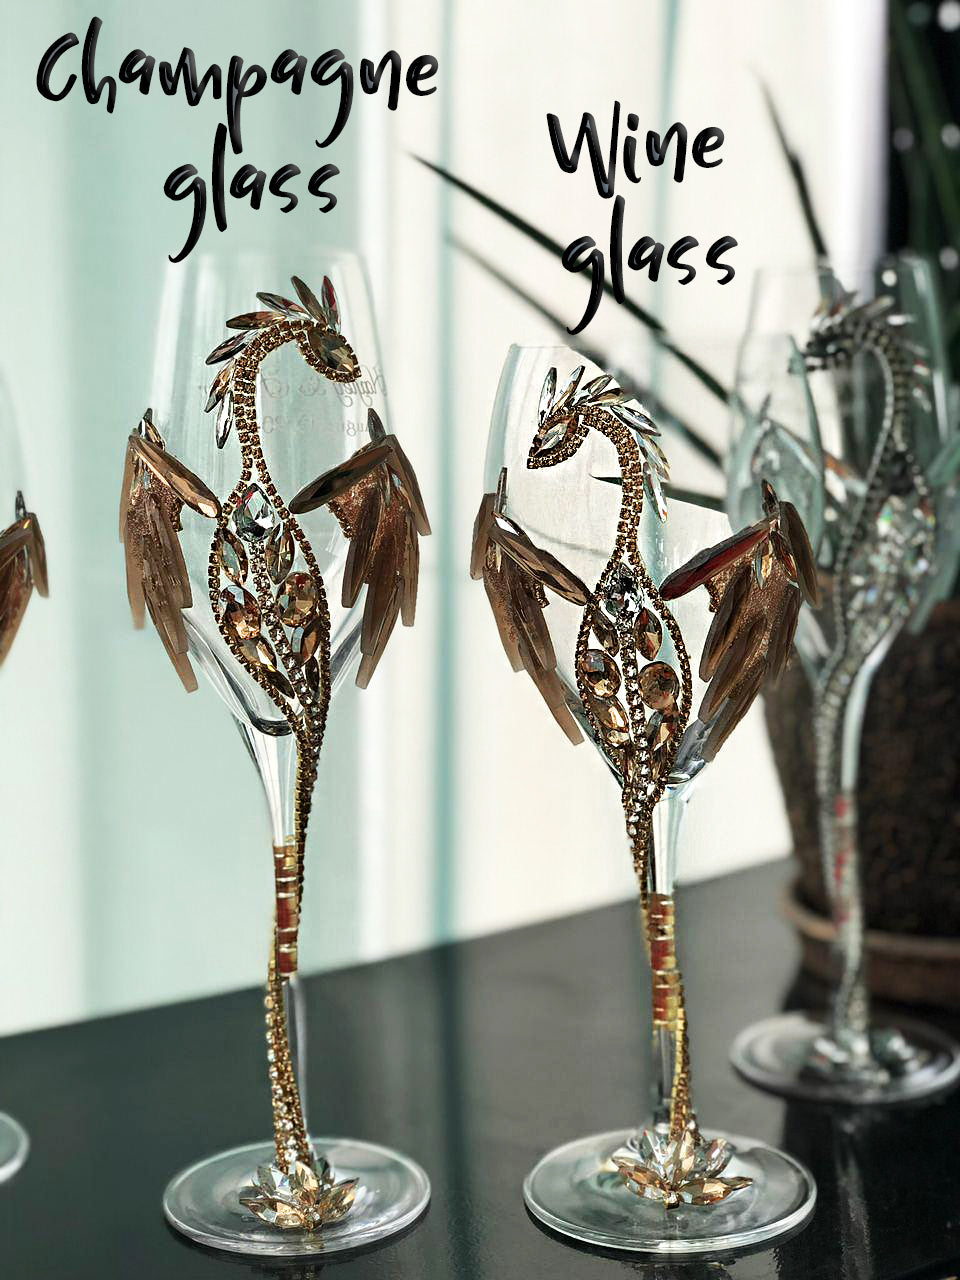 Close-up view of two ornate glasses: one labeled "Champagne glass" and the other labeled "Wine glass." Both glasses feature intricately designed stems resembling jeweled dragons with golden and silver accents against a serene backdrop